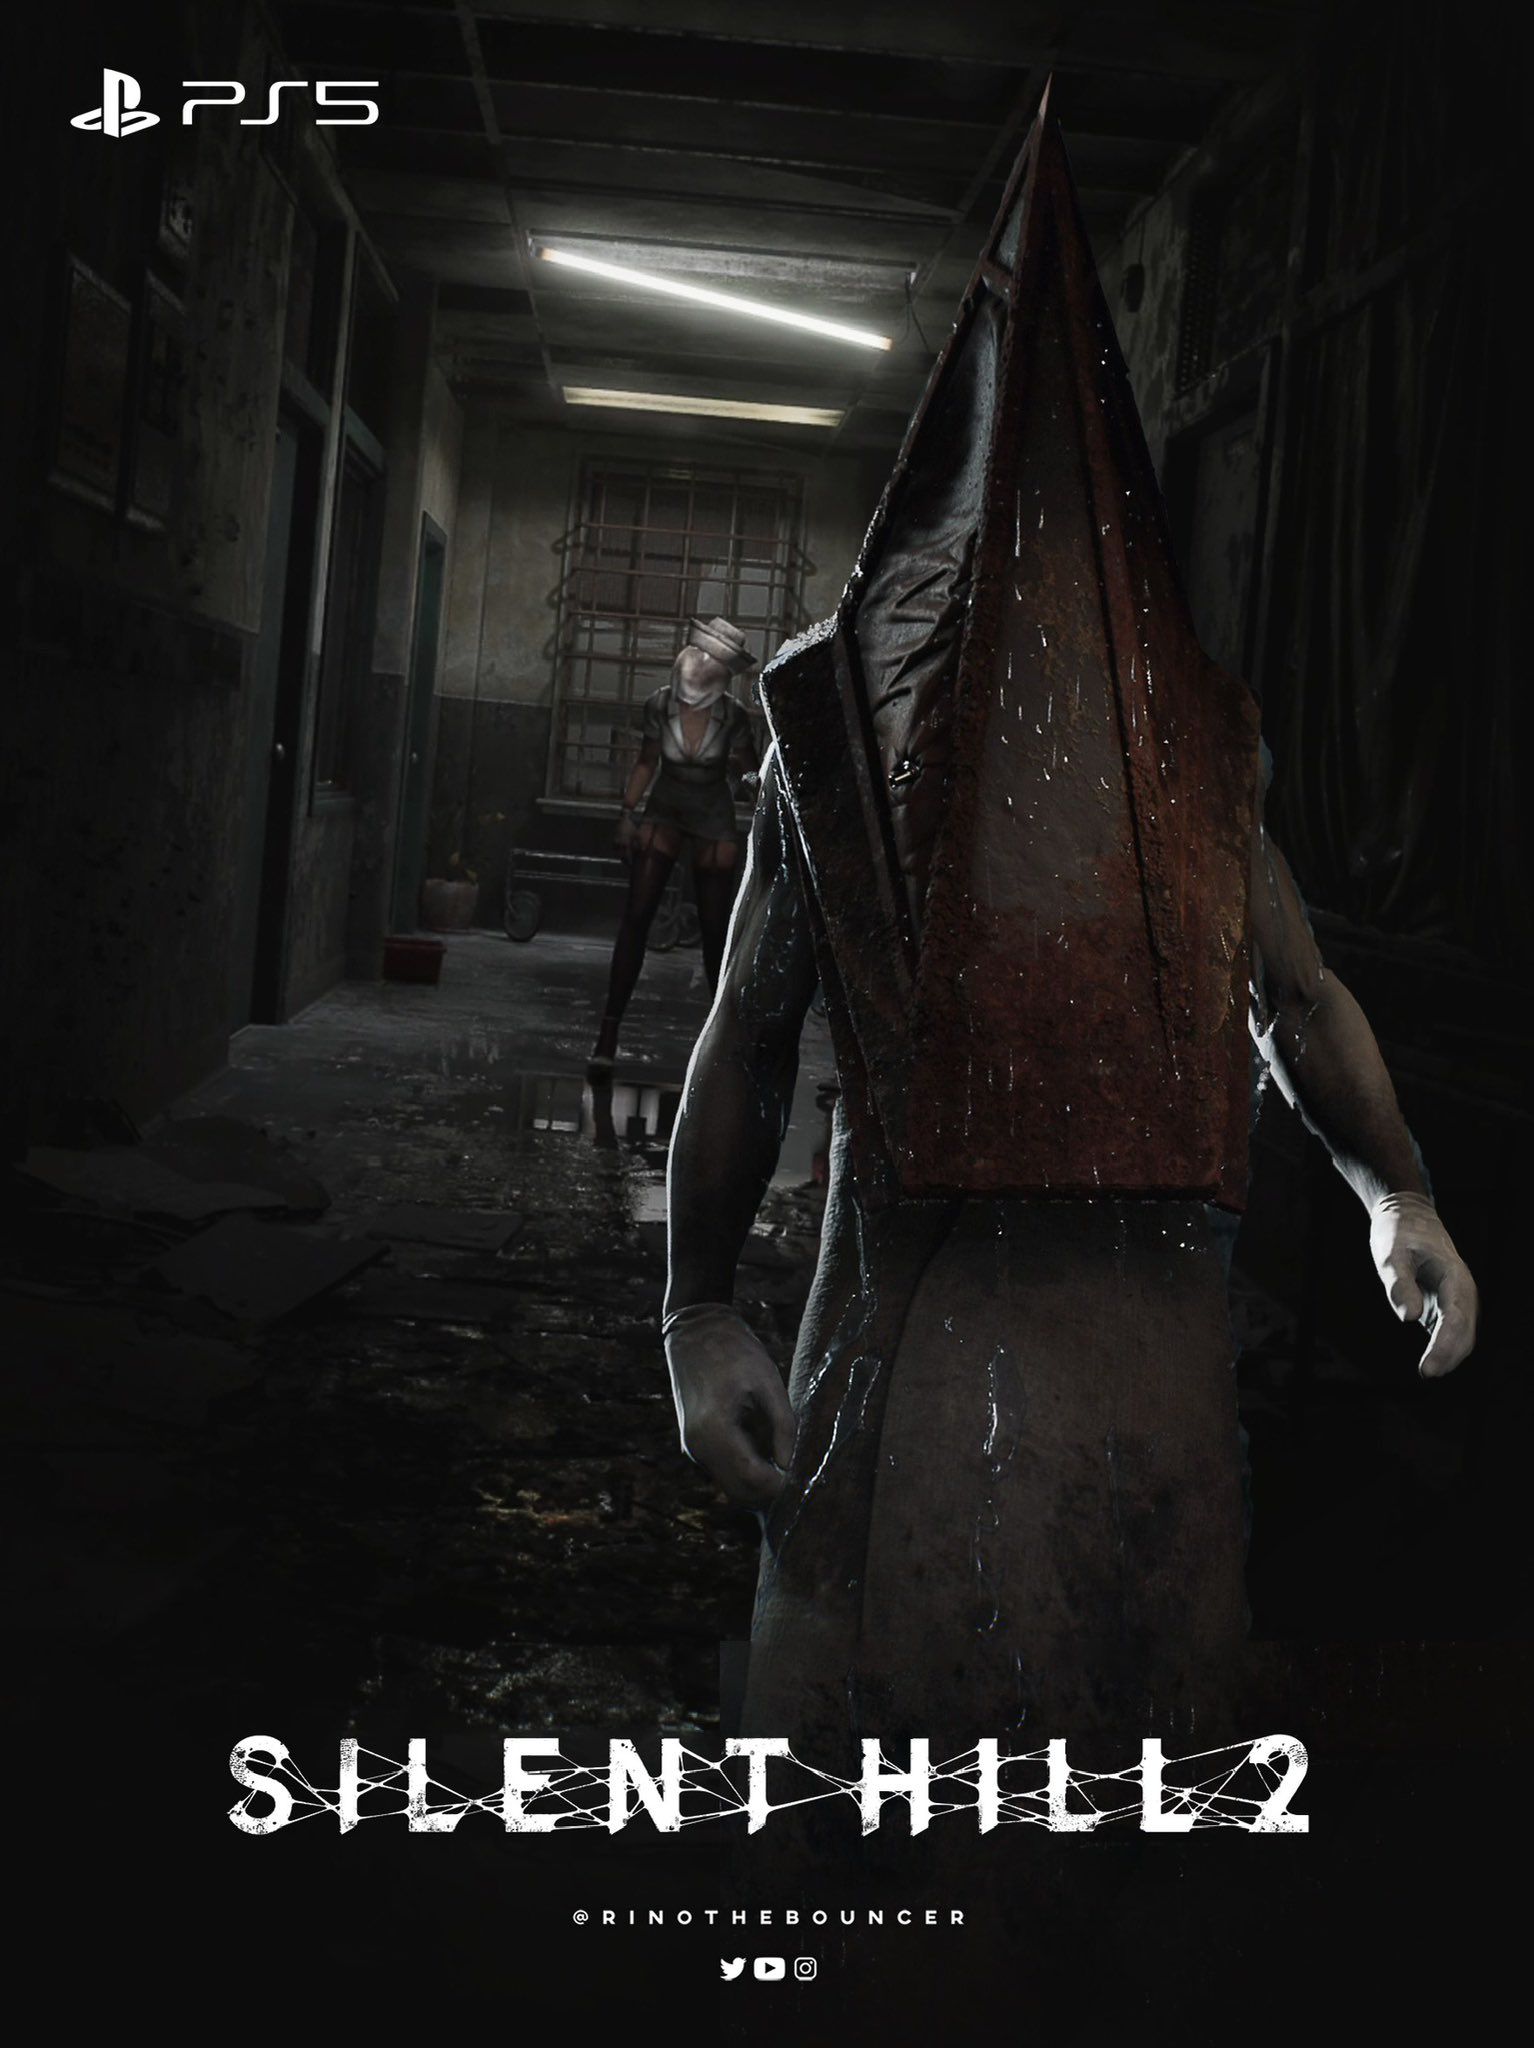 Rino on X: UPDATE: Silent Hill 2 dev profile on Steam shows 12